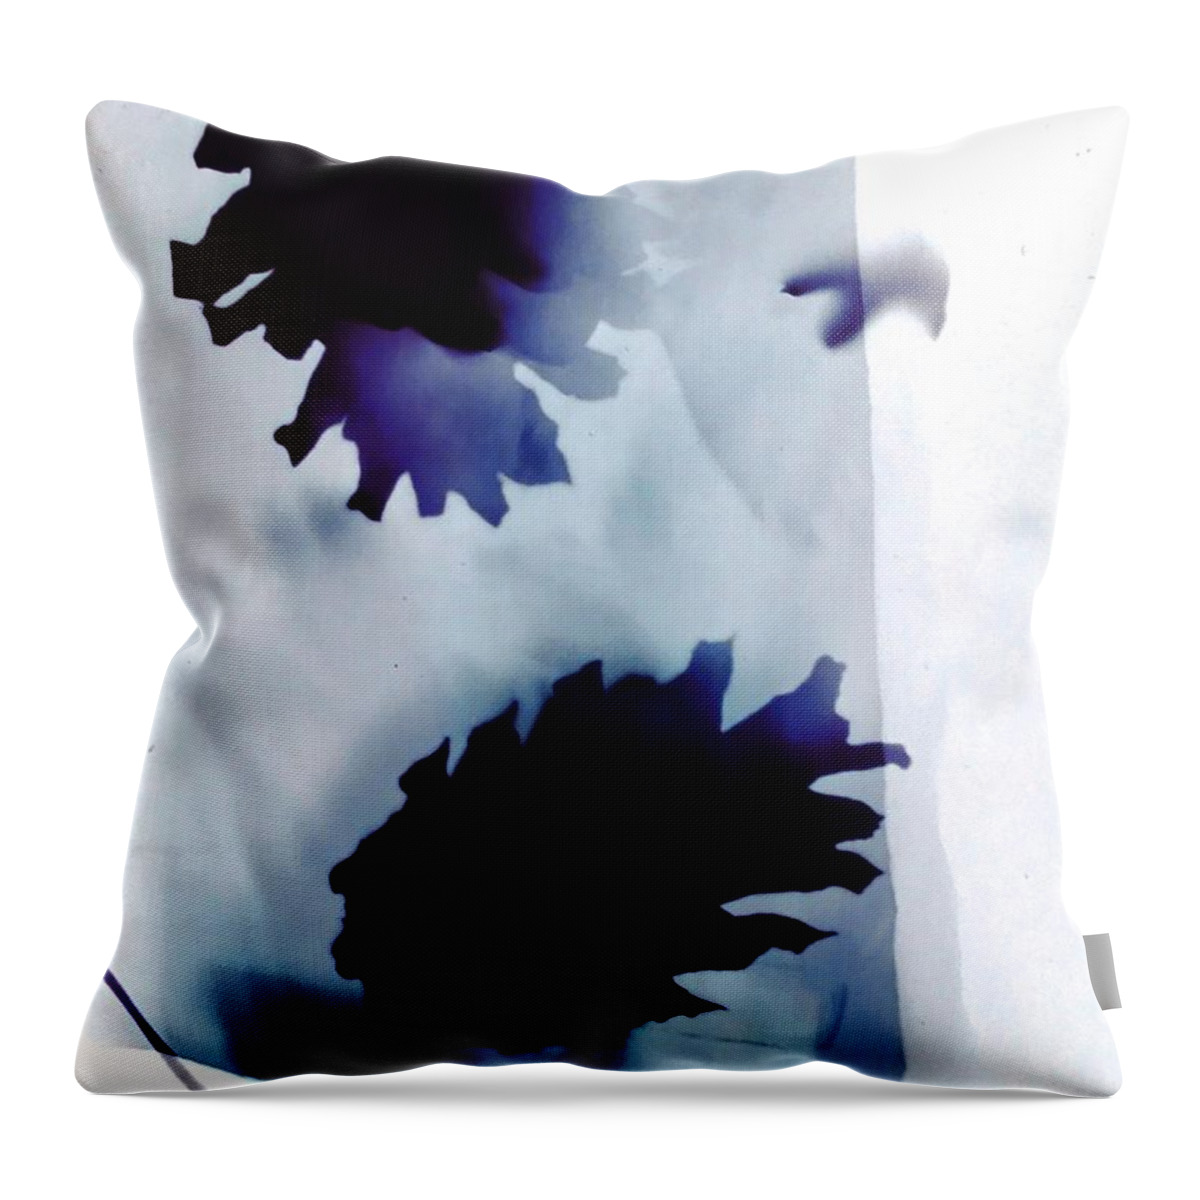 Photogram Throw Pillow featuring the photograph Pine cones blue and white by Itsonlythemoon